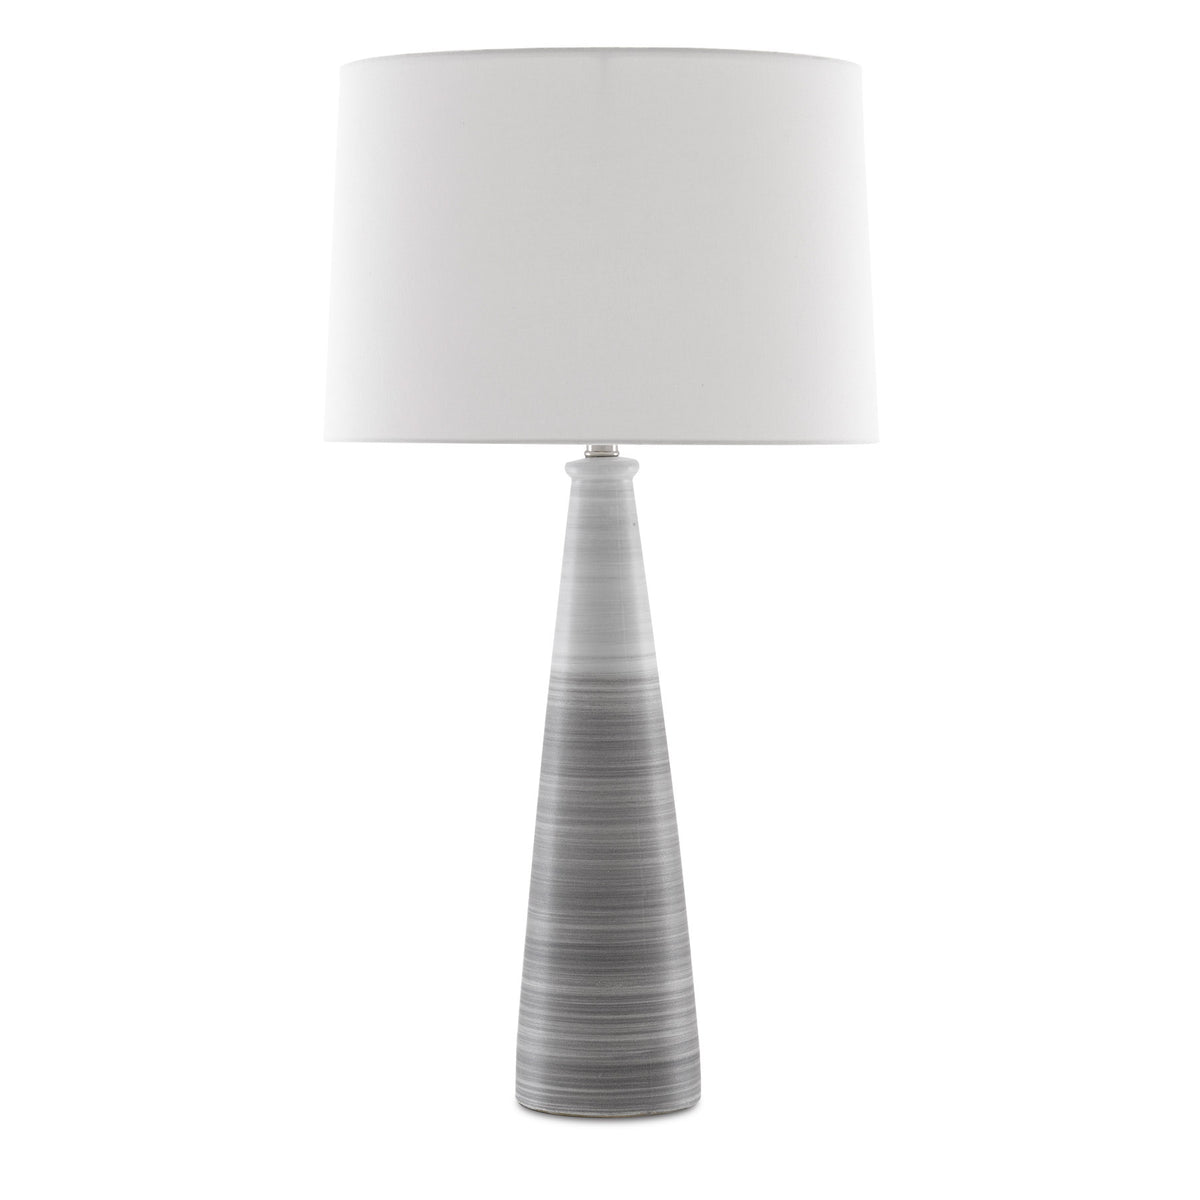 Forefront Table Lamp